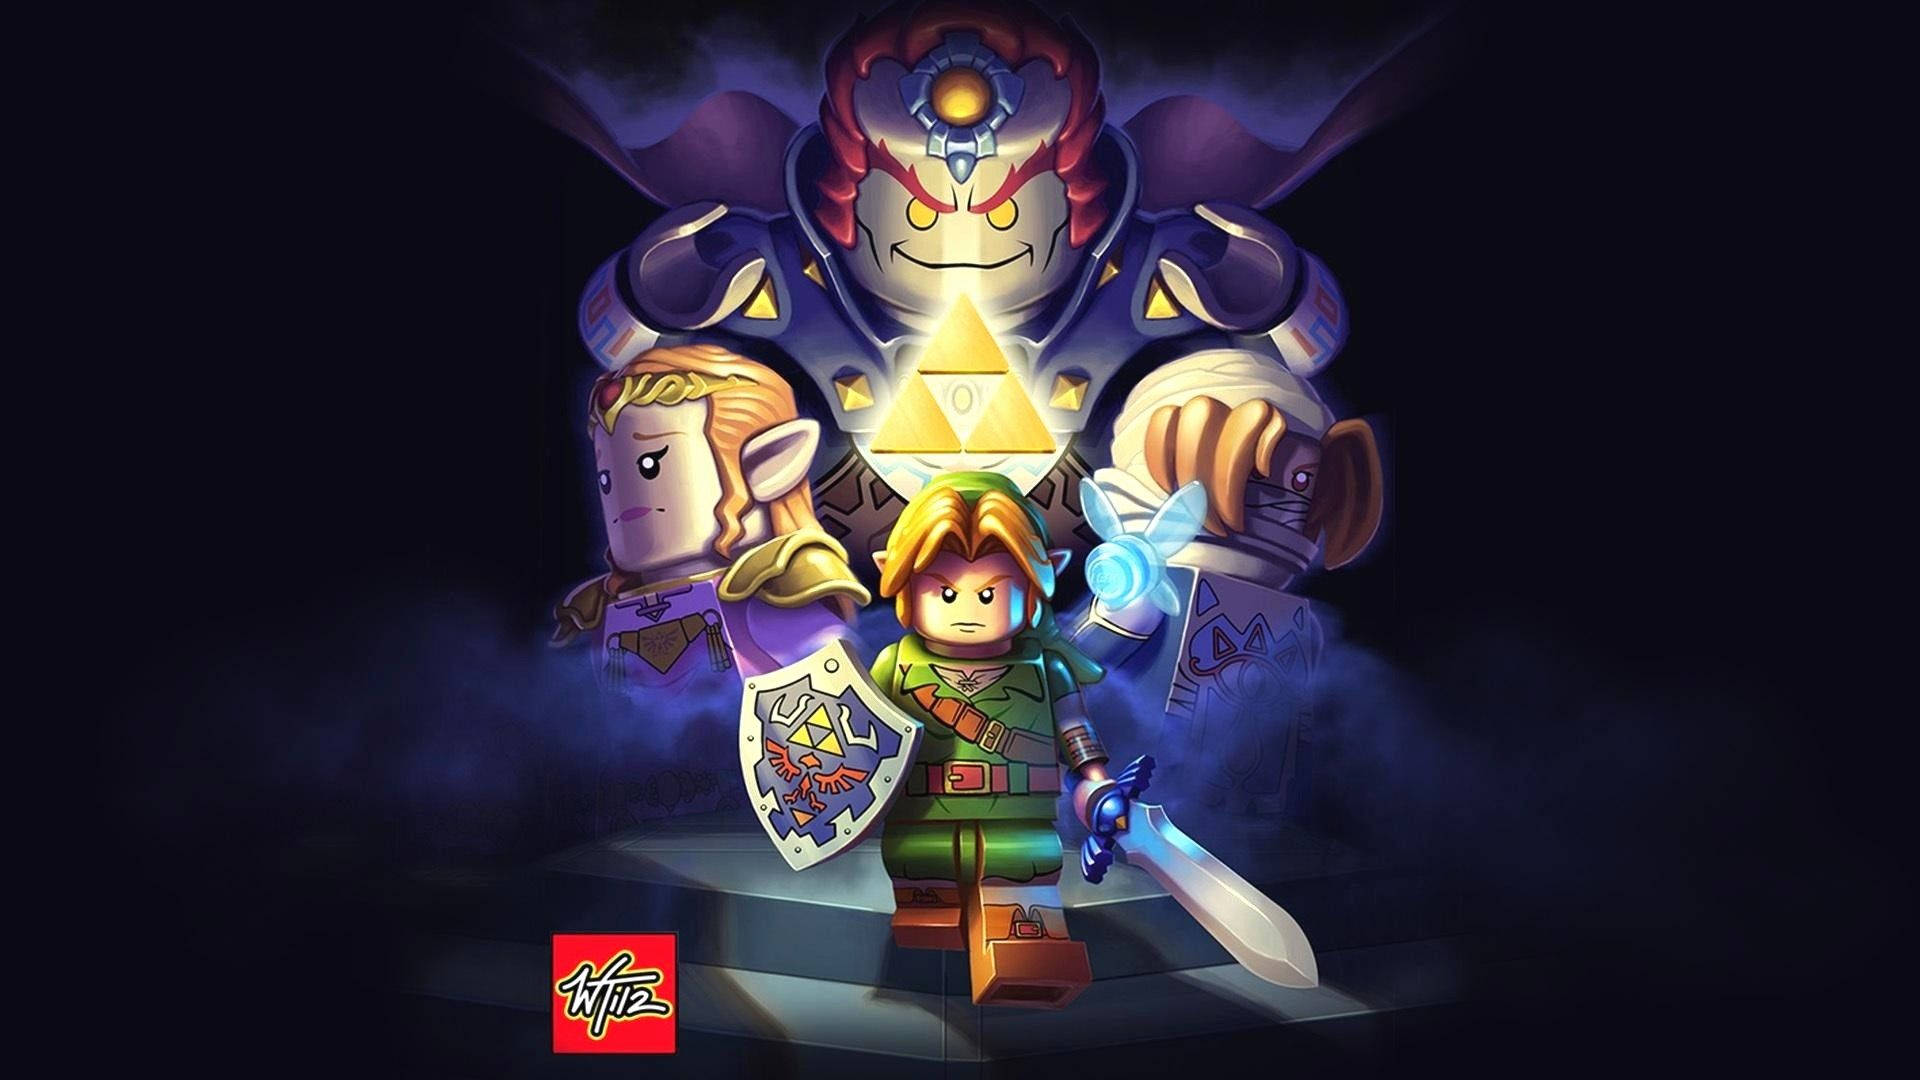 Step into the wild world of Hyrule in The Legend of Zelda. Wallpaper